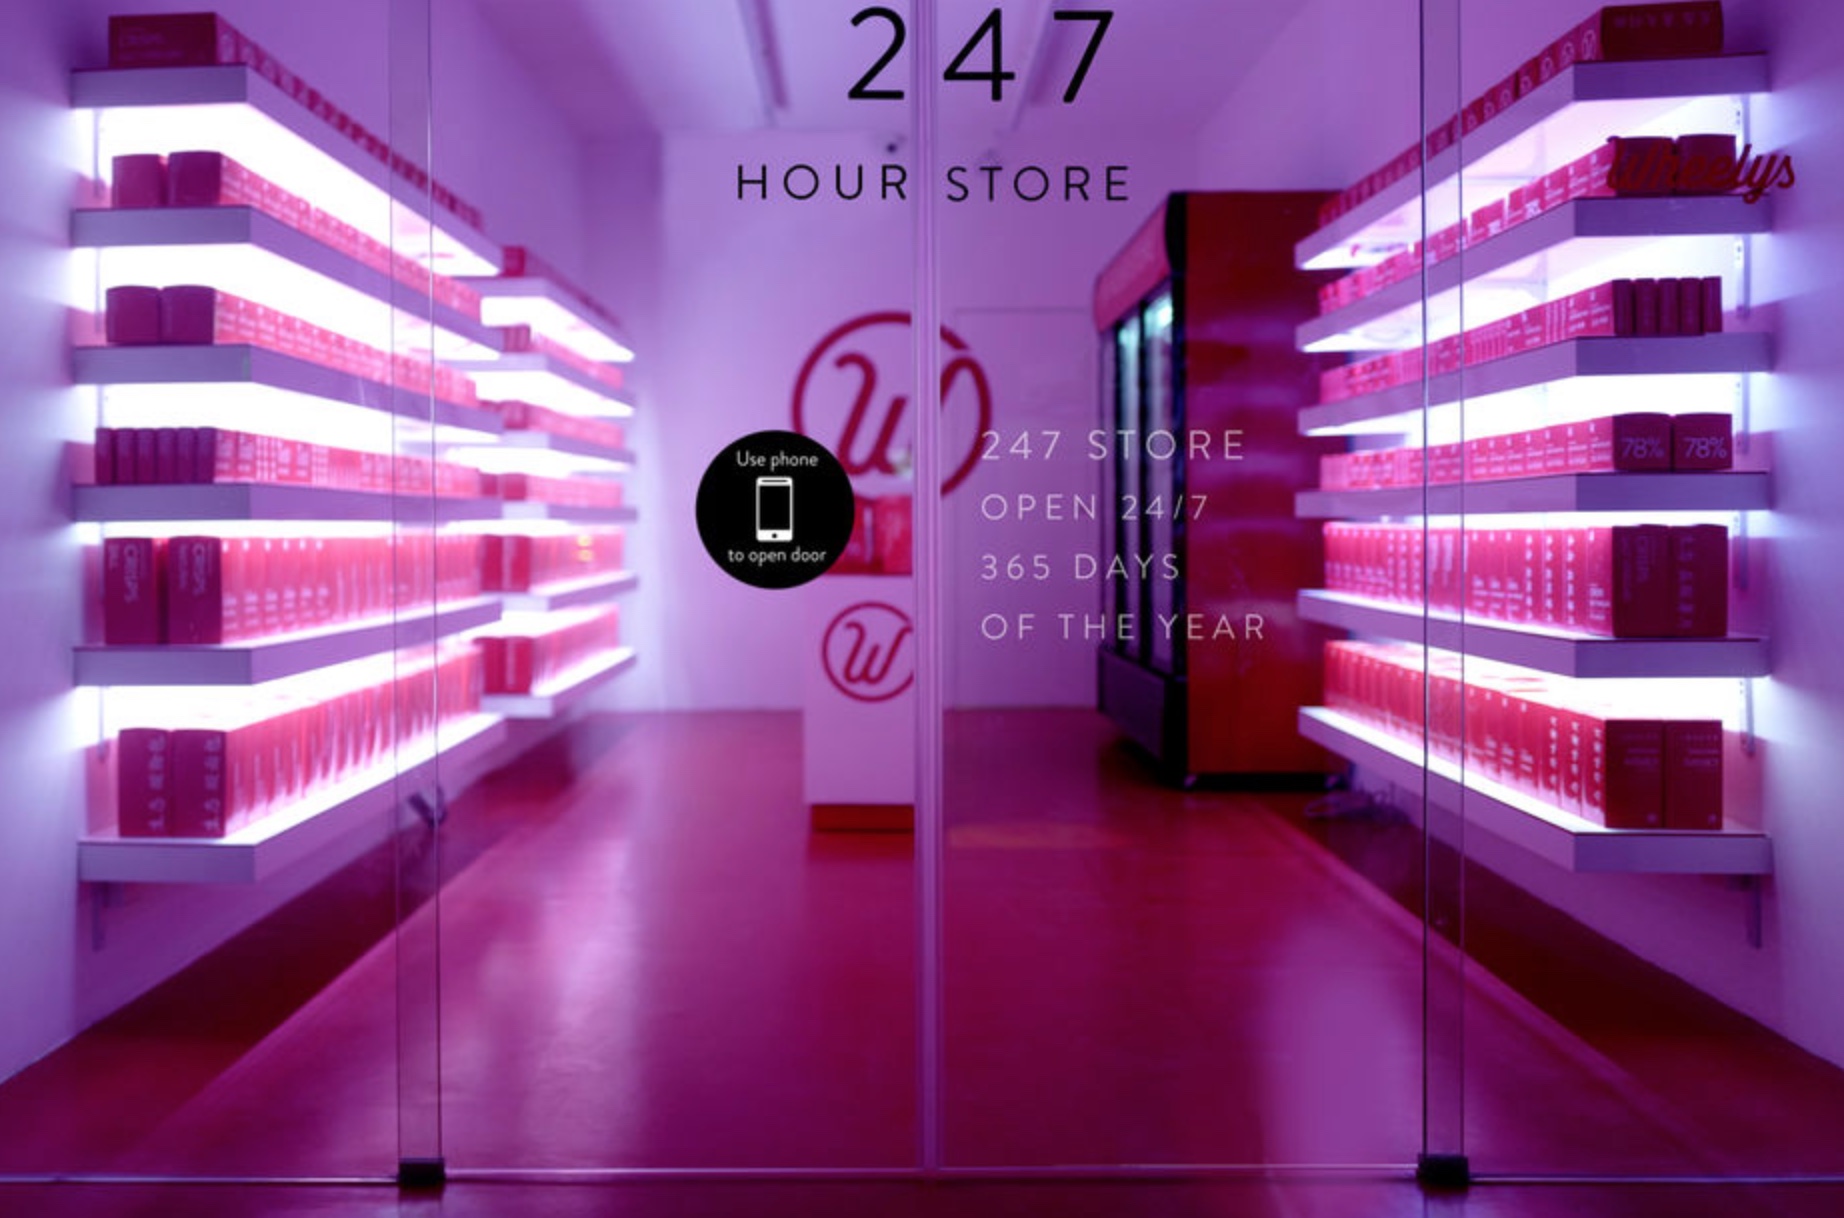 China Is Testing the First Autonomous Store on the Wheels blog post cover image